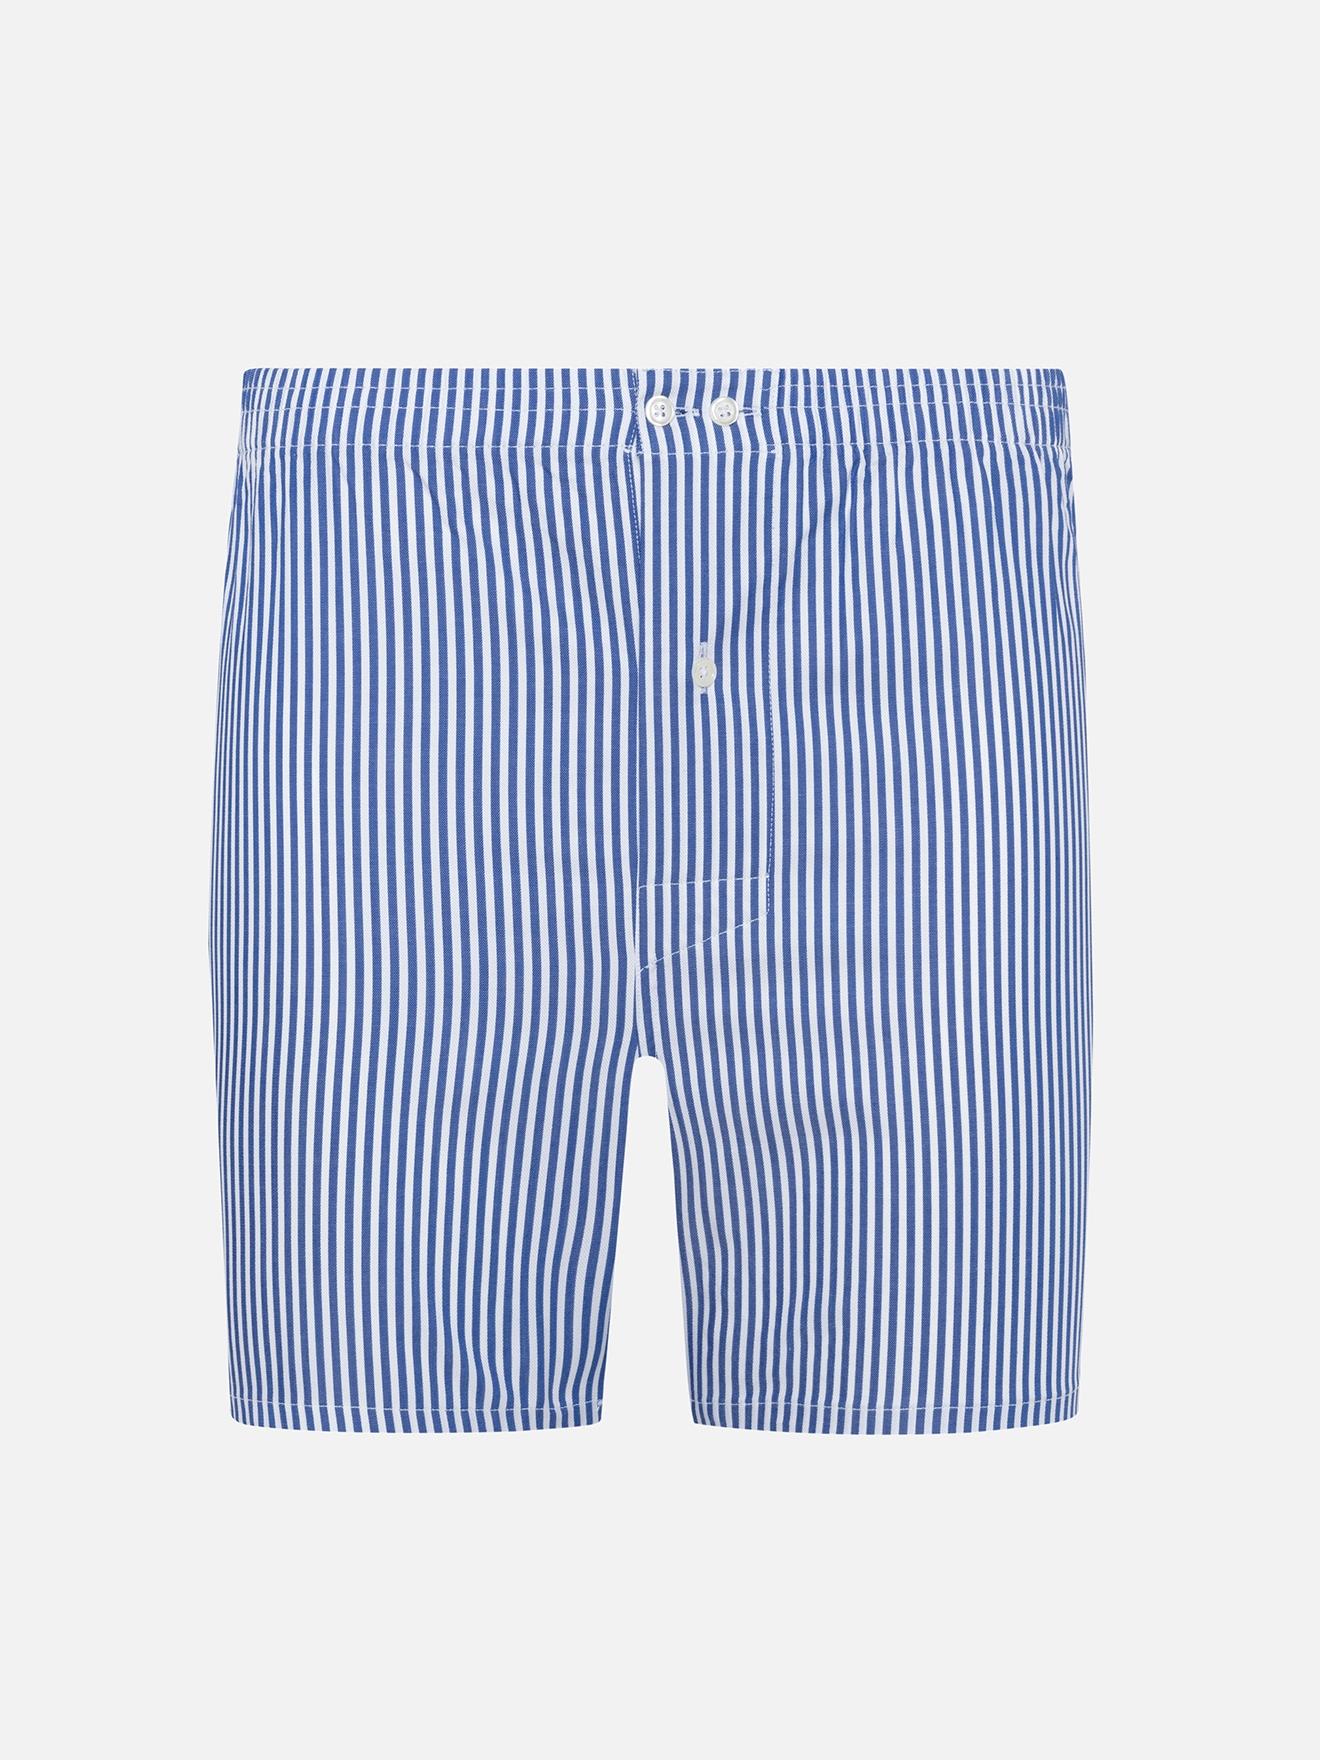 Clive navy striped boxer shorts